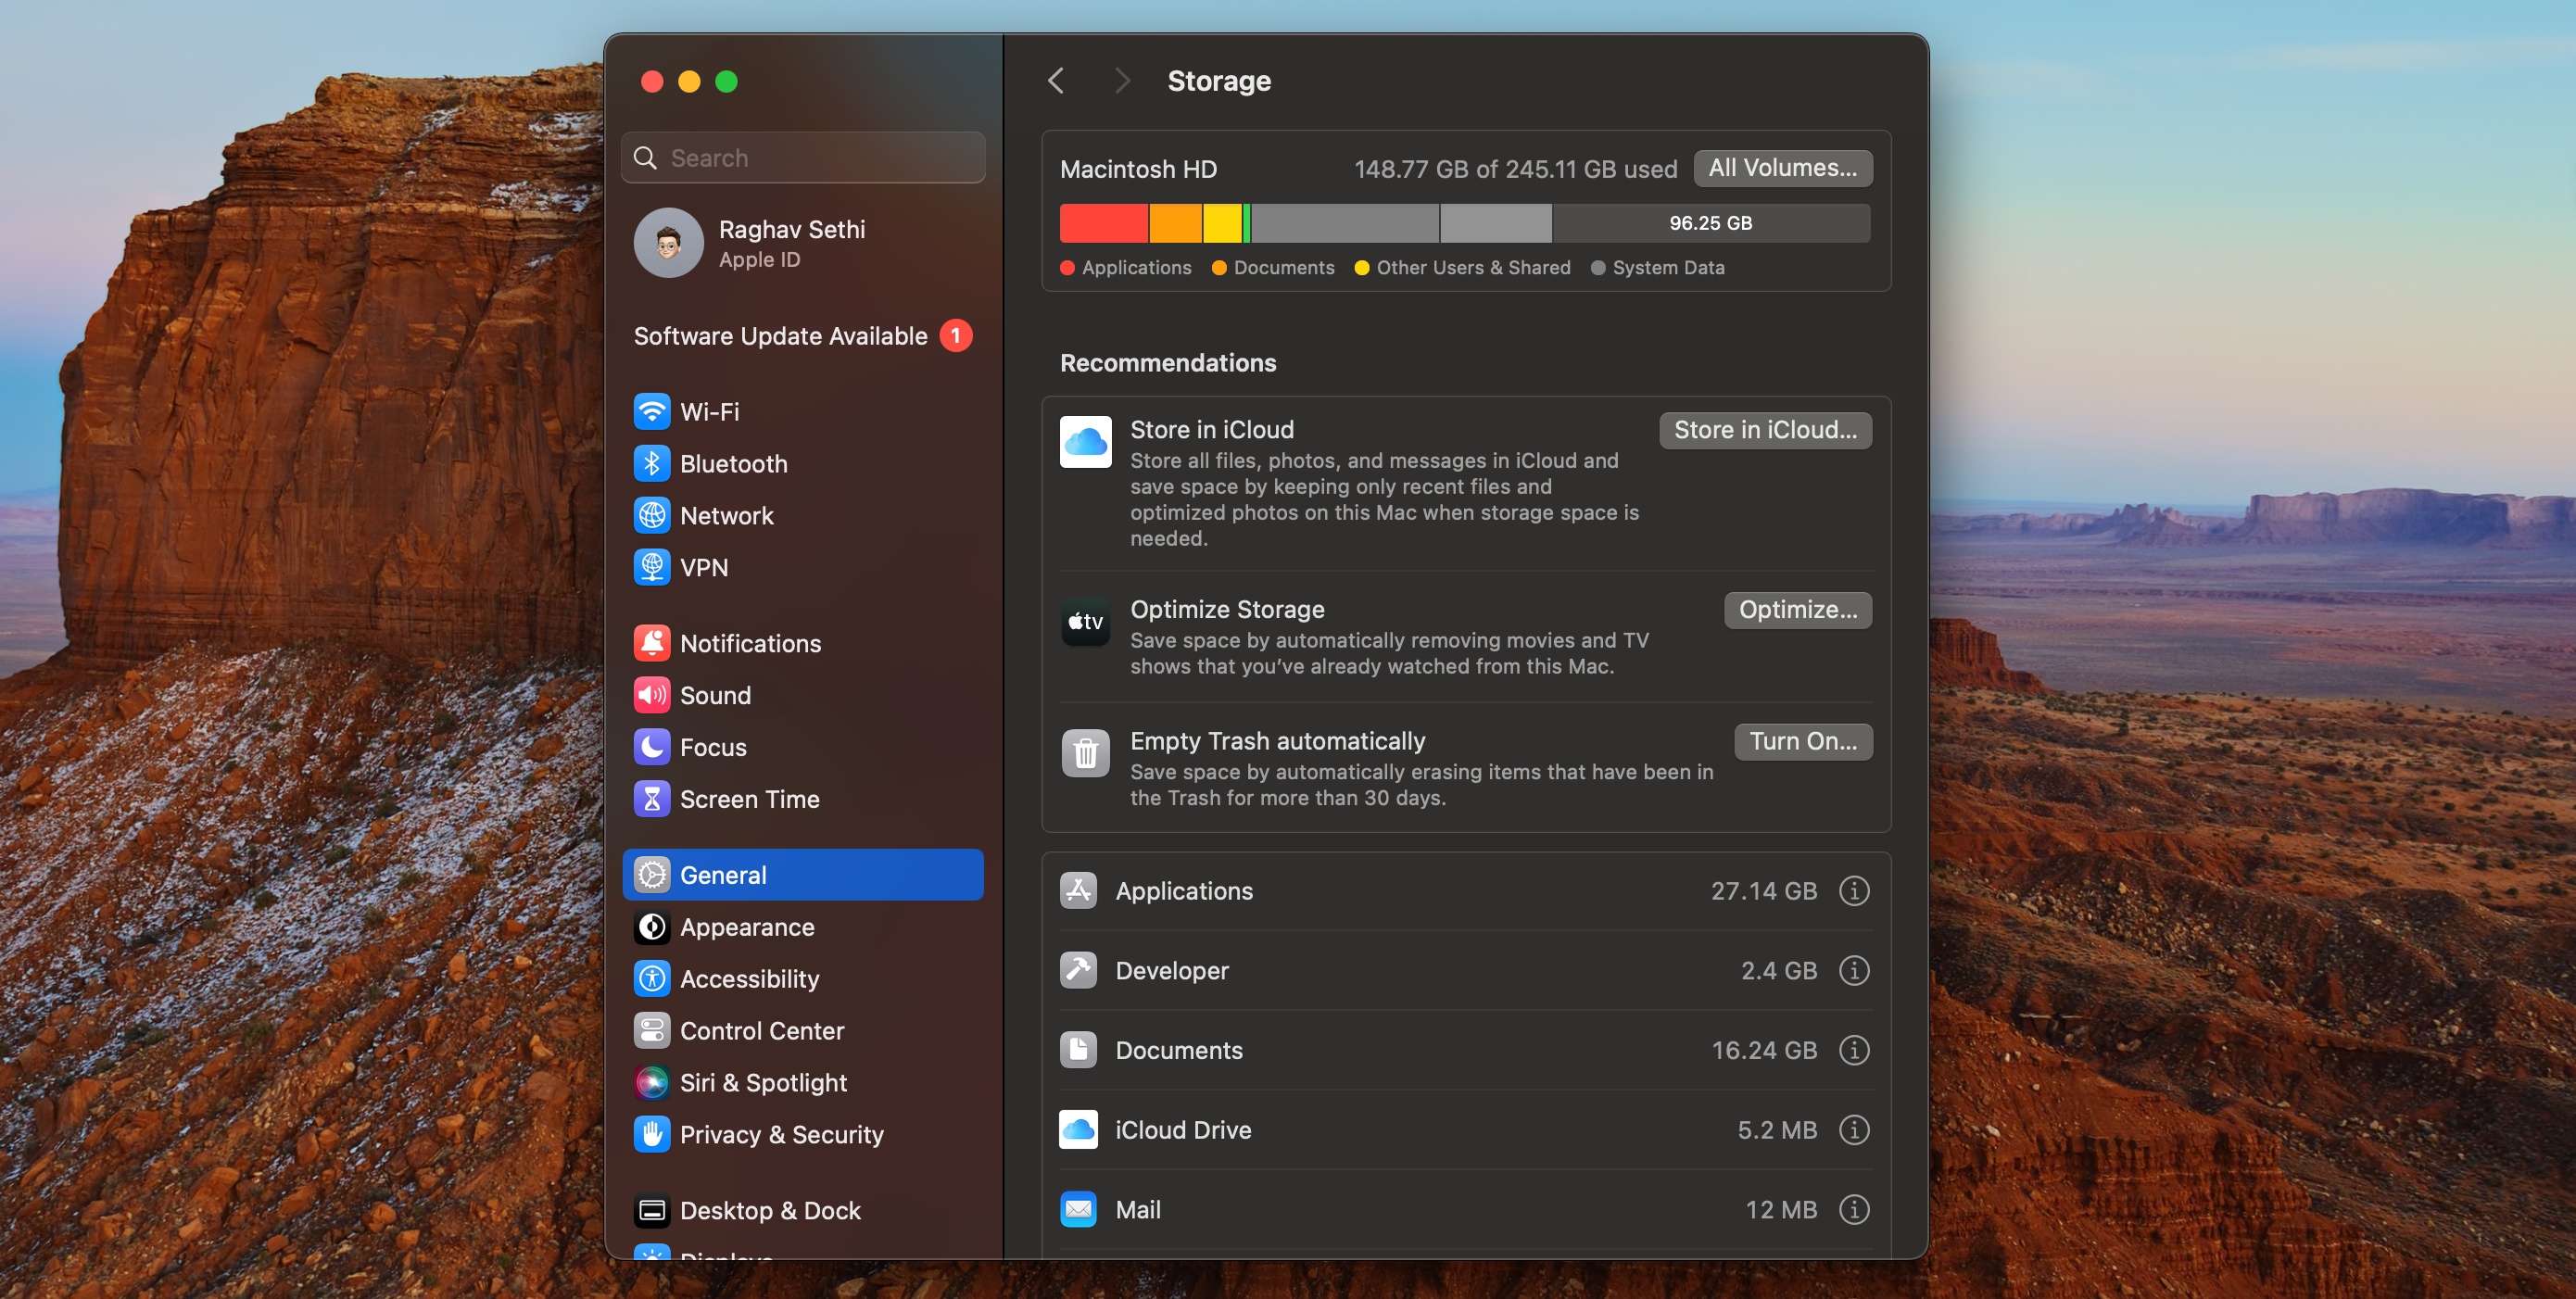 macOS System Settings menu showing the Storage section